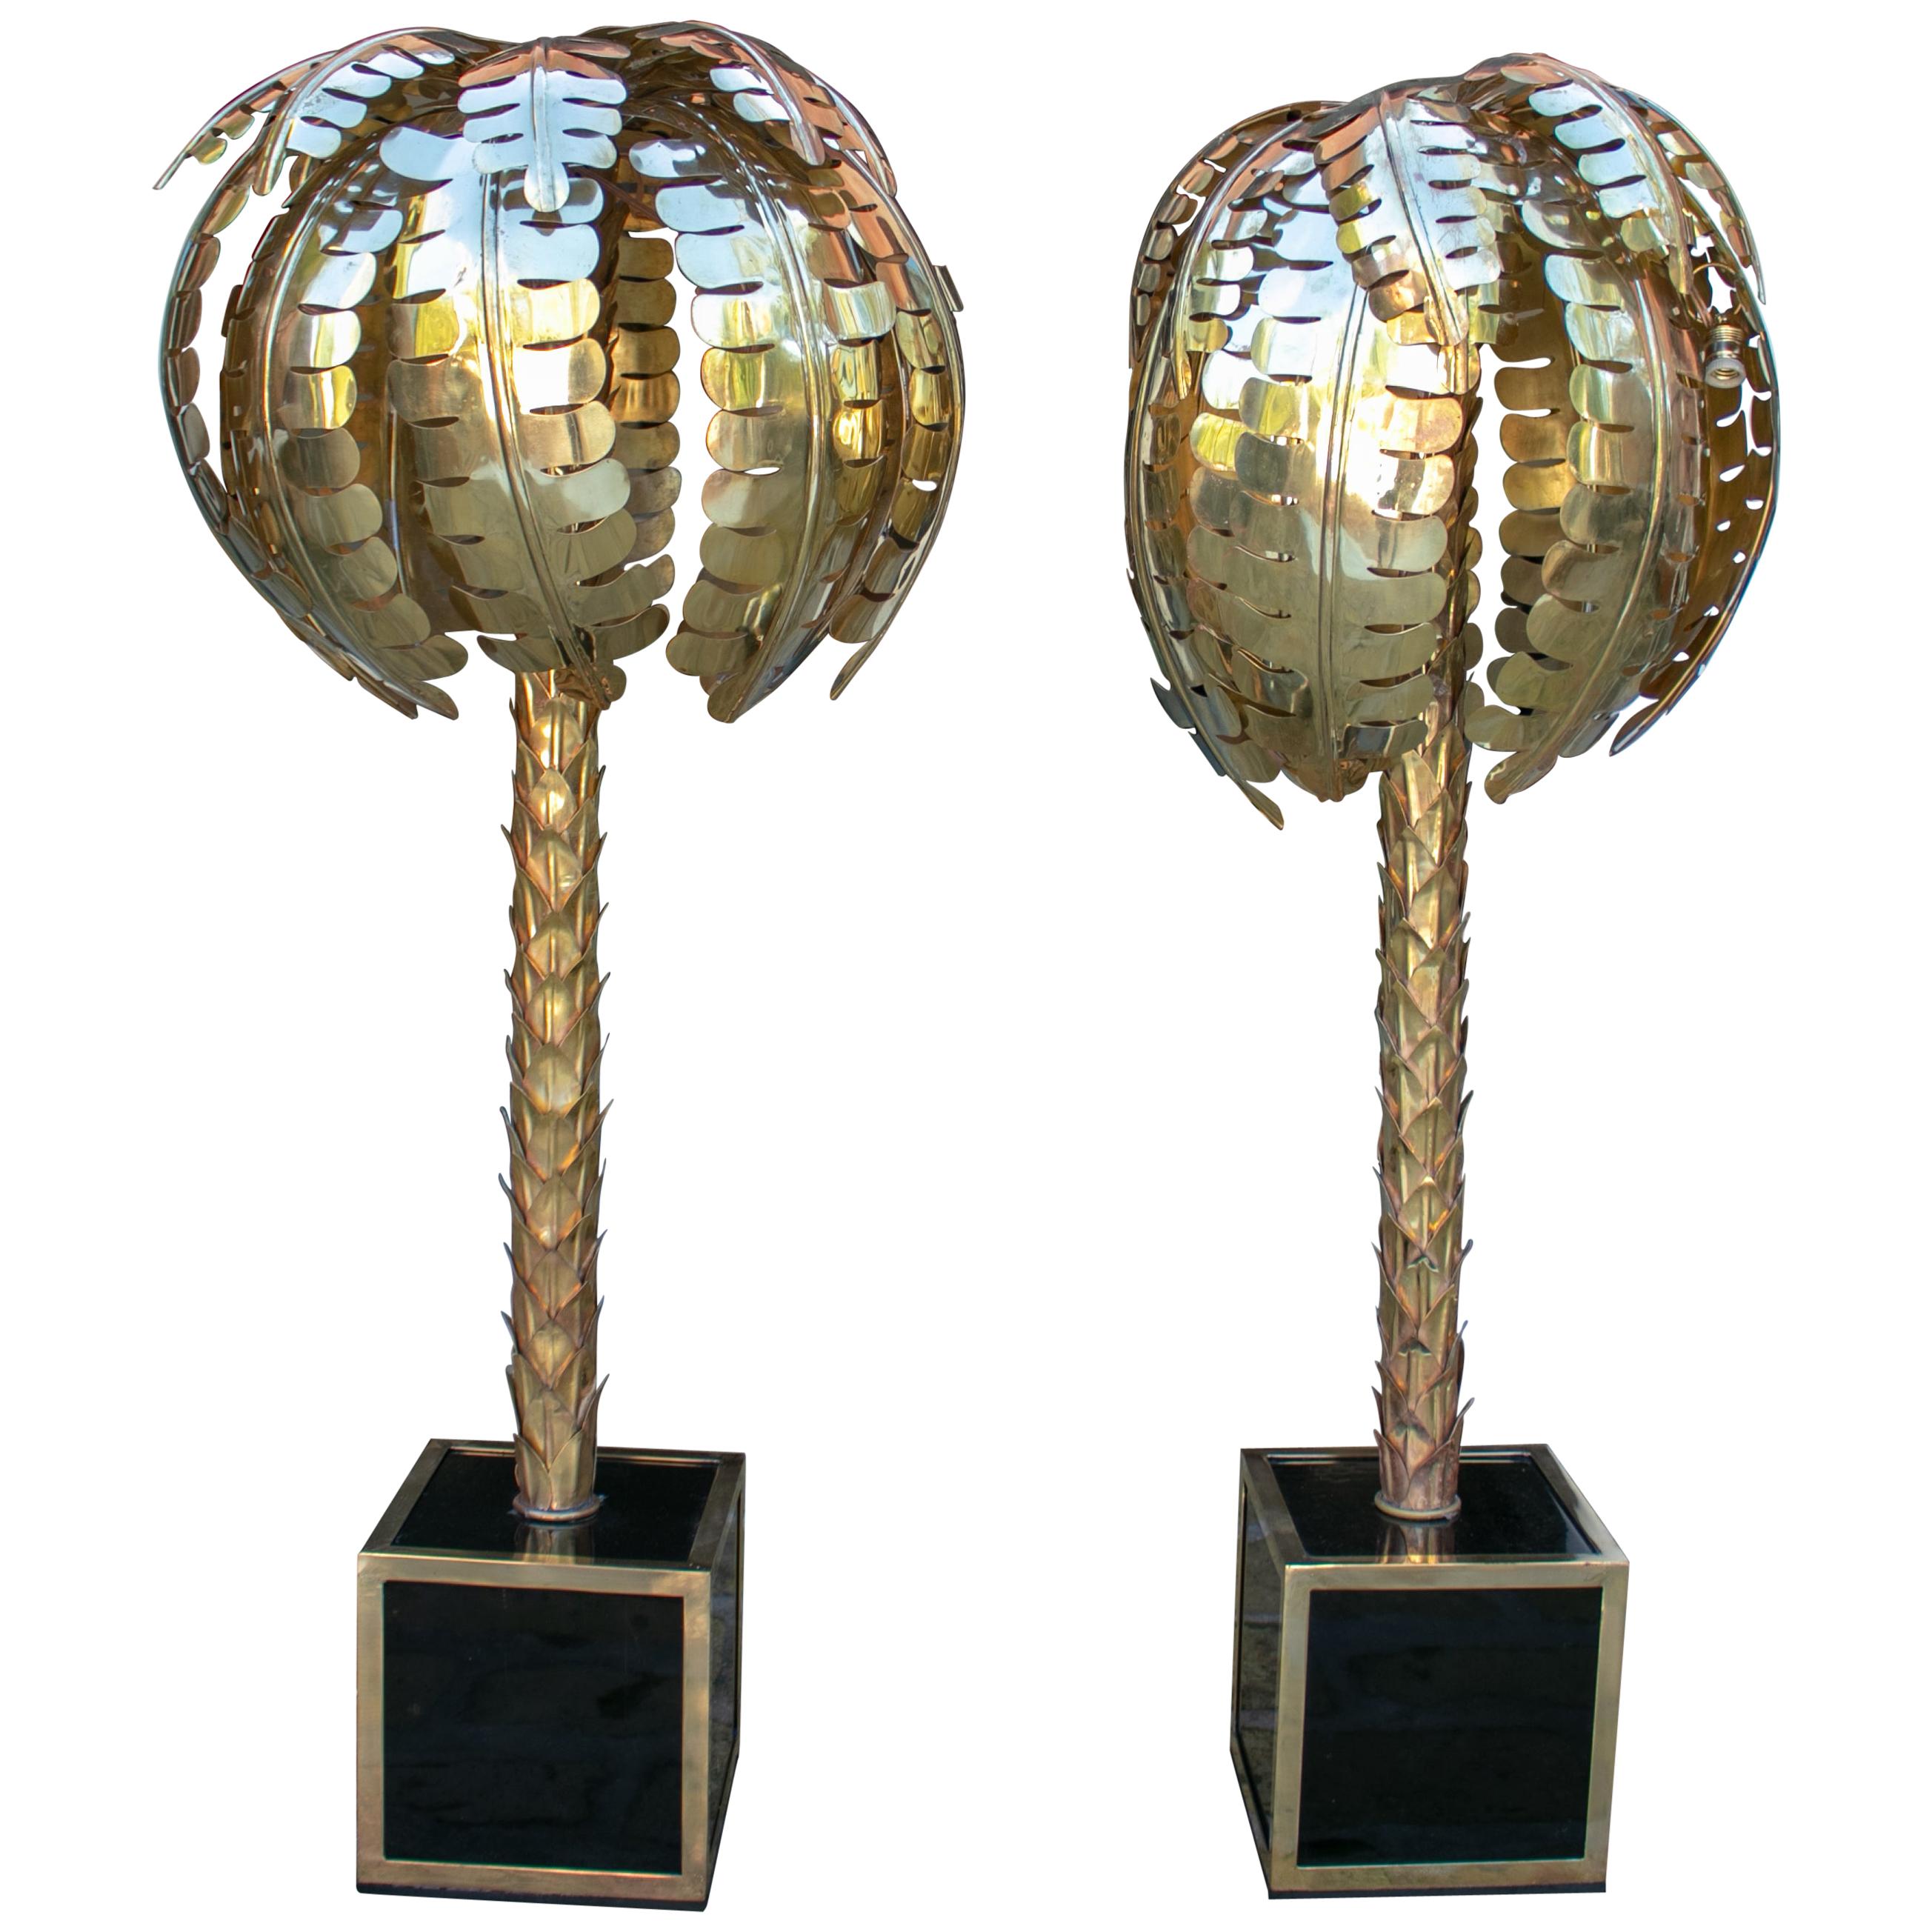 Pair of Bronze Floor or Desk Lamps Palm Tree-Shaped and Squared Base